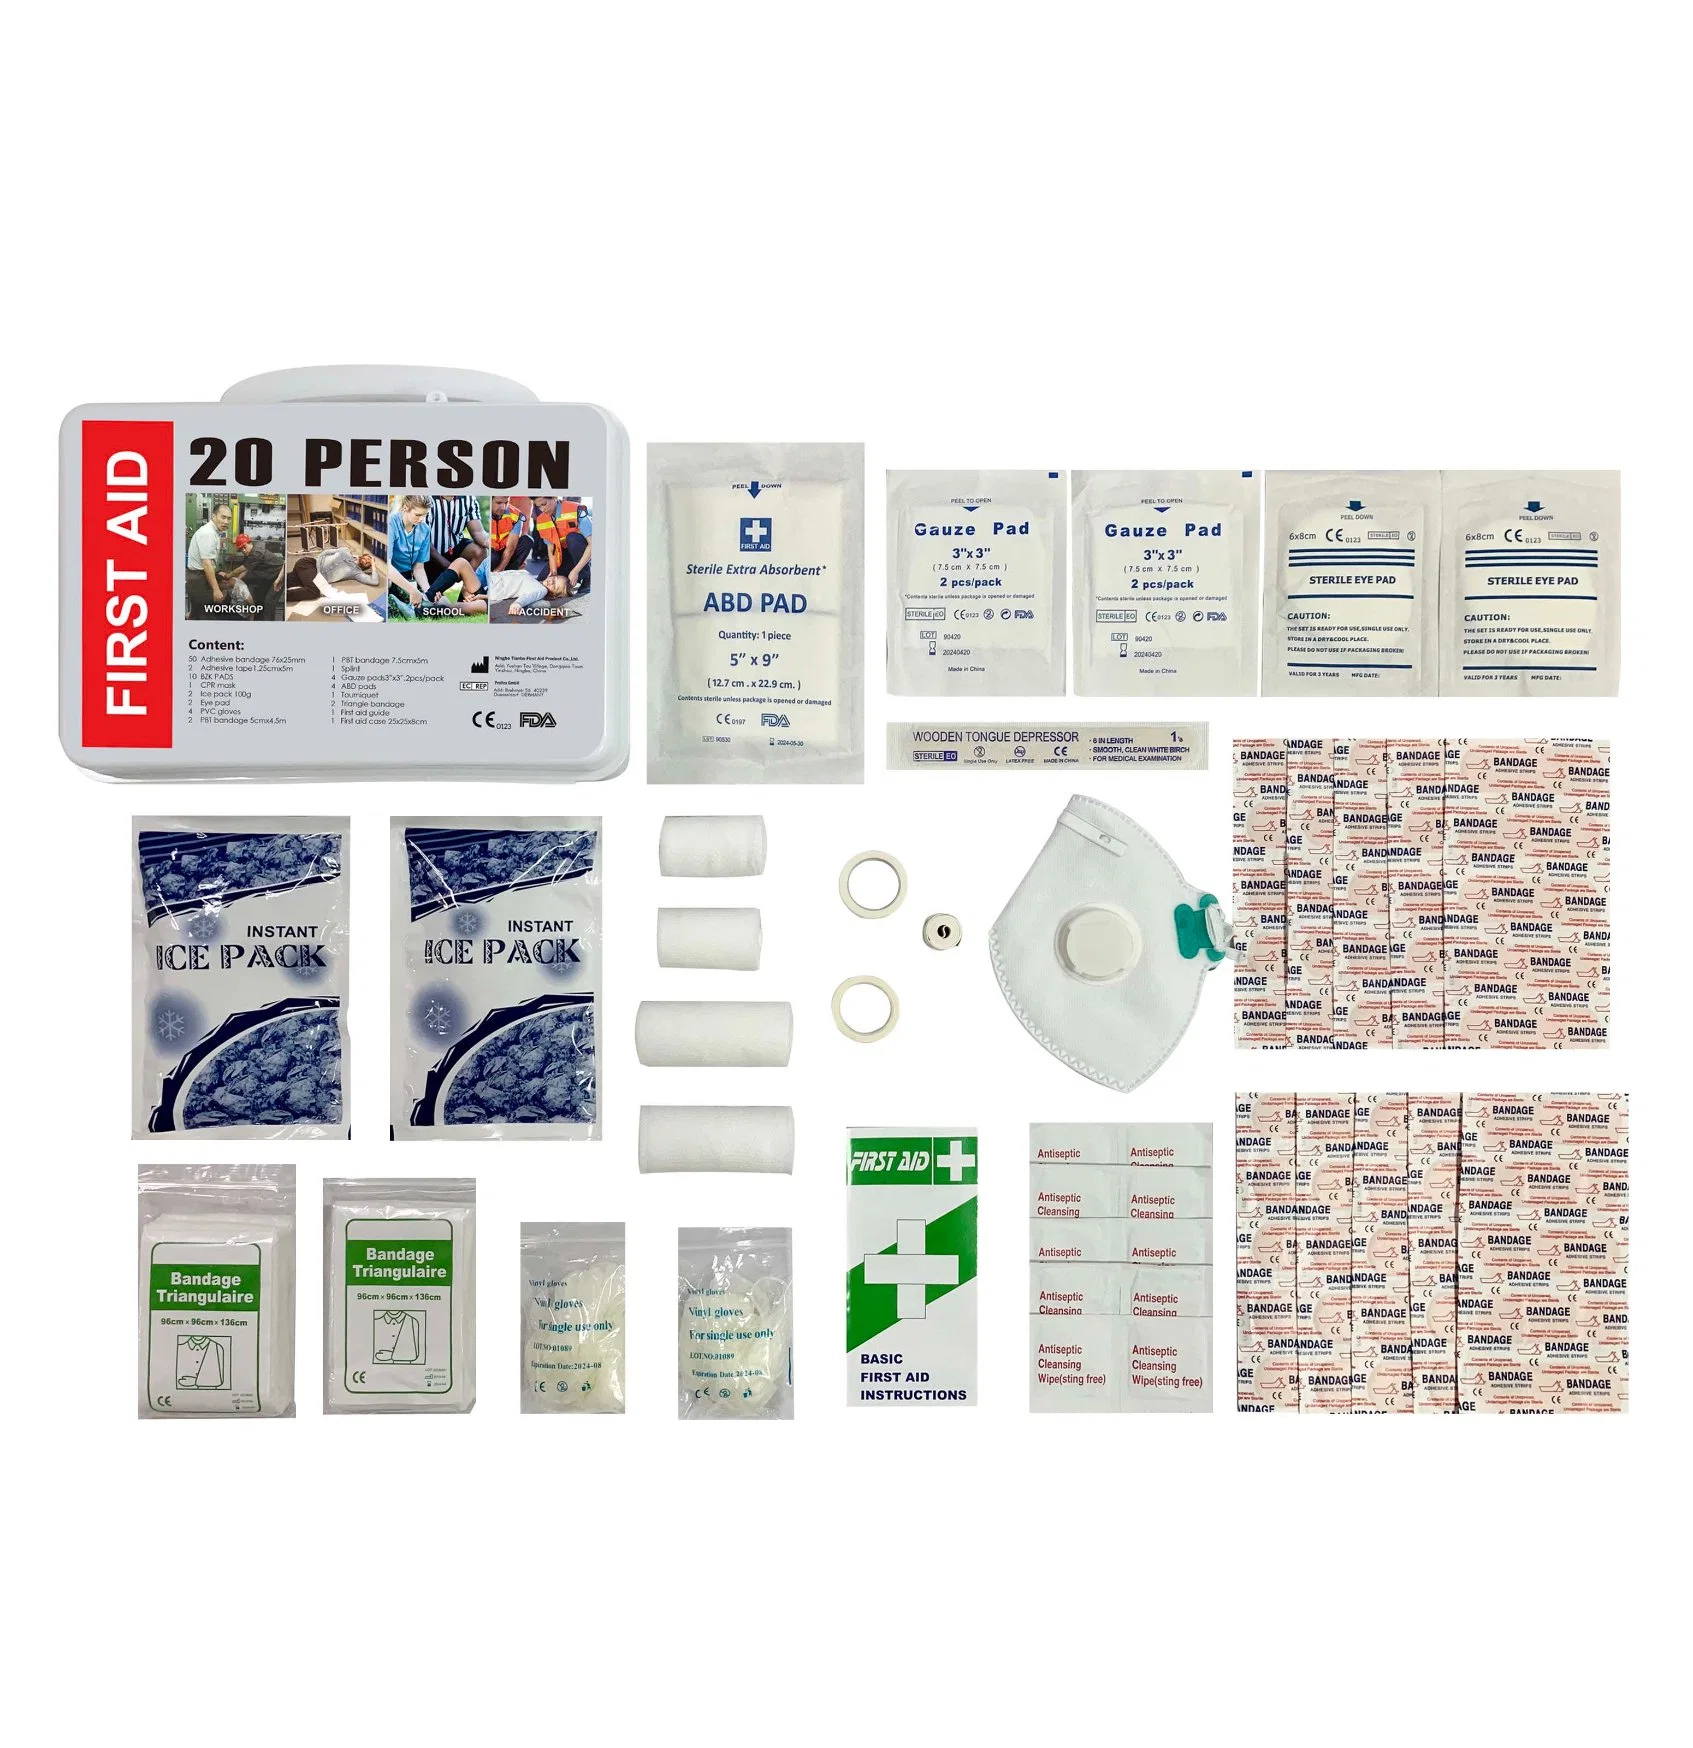 China Medical Supplies Home Family First Aid Kit Emergency Kits EVA Waterproof First Aid Box